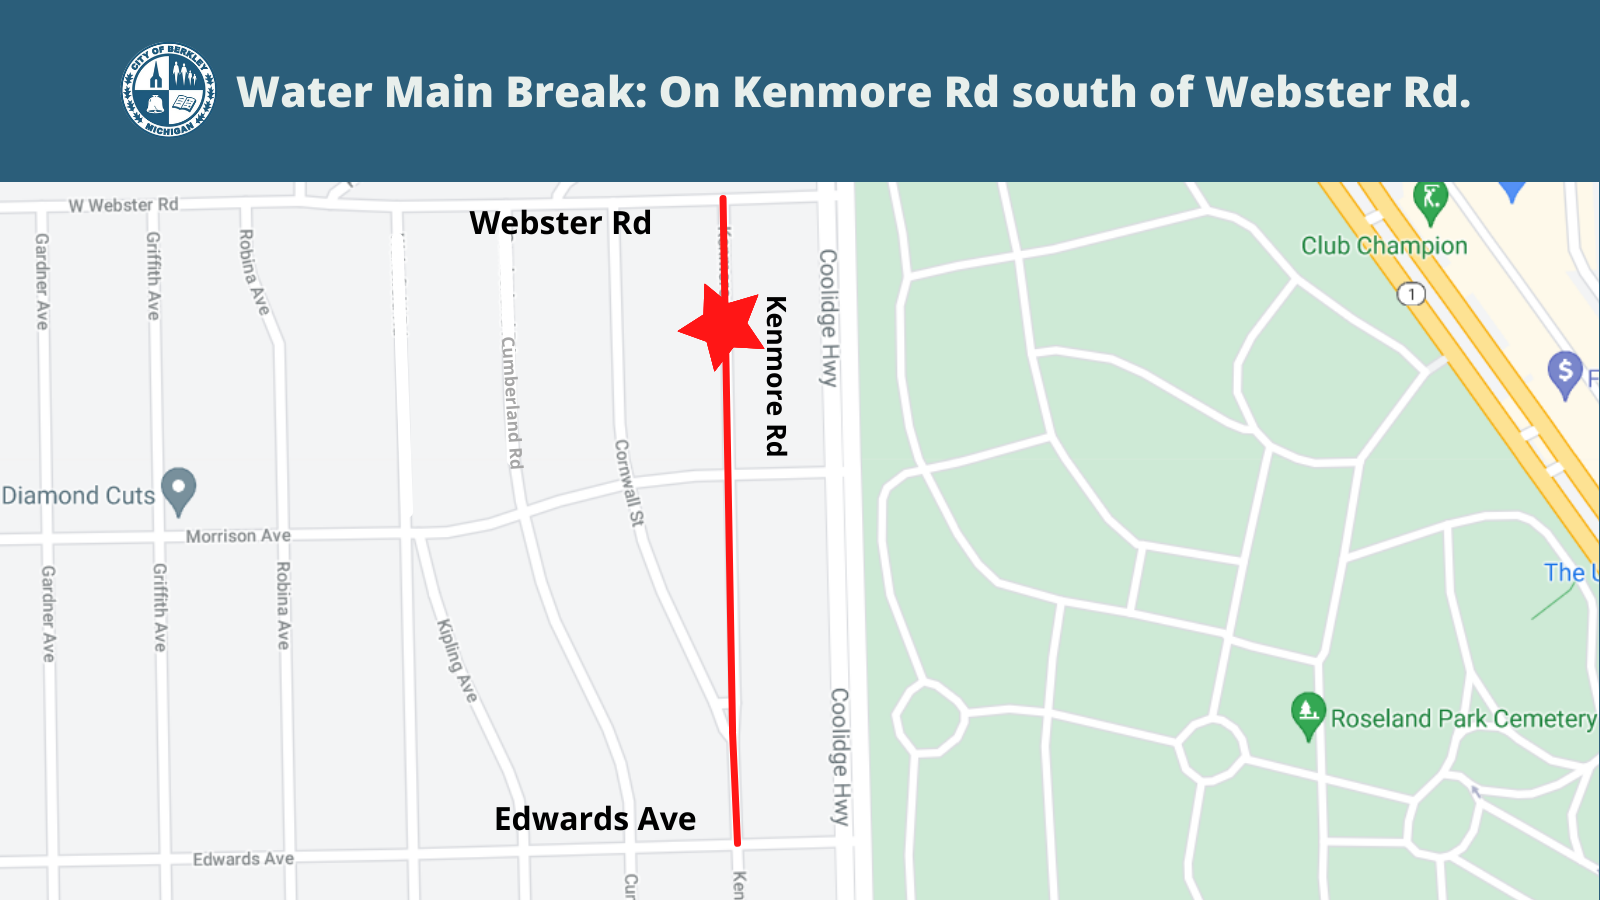 Water Main Break Maps_On Kenmore south of Webster Rd_3.3.22